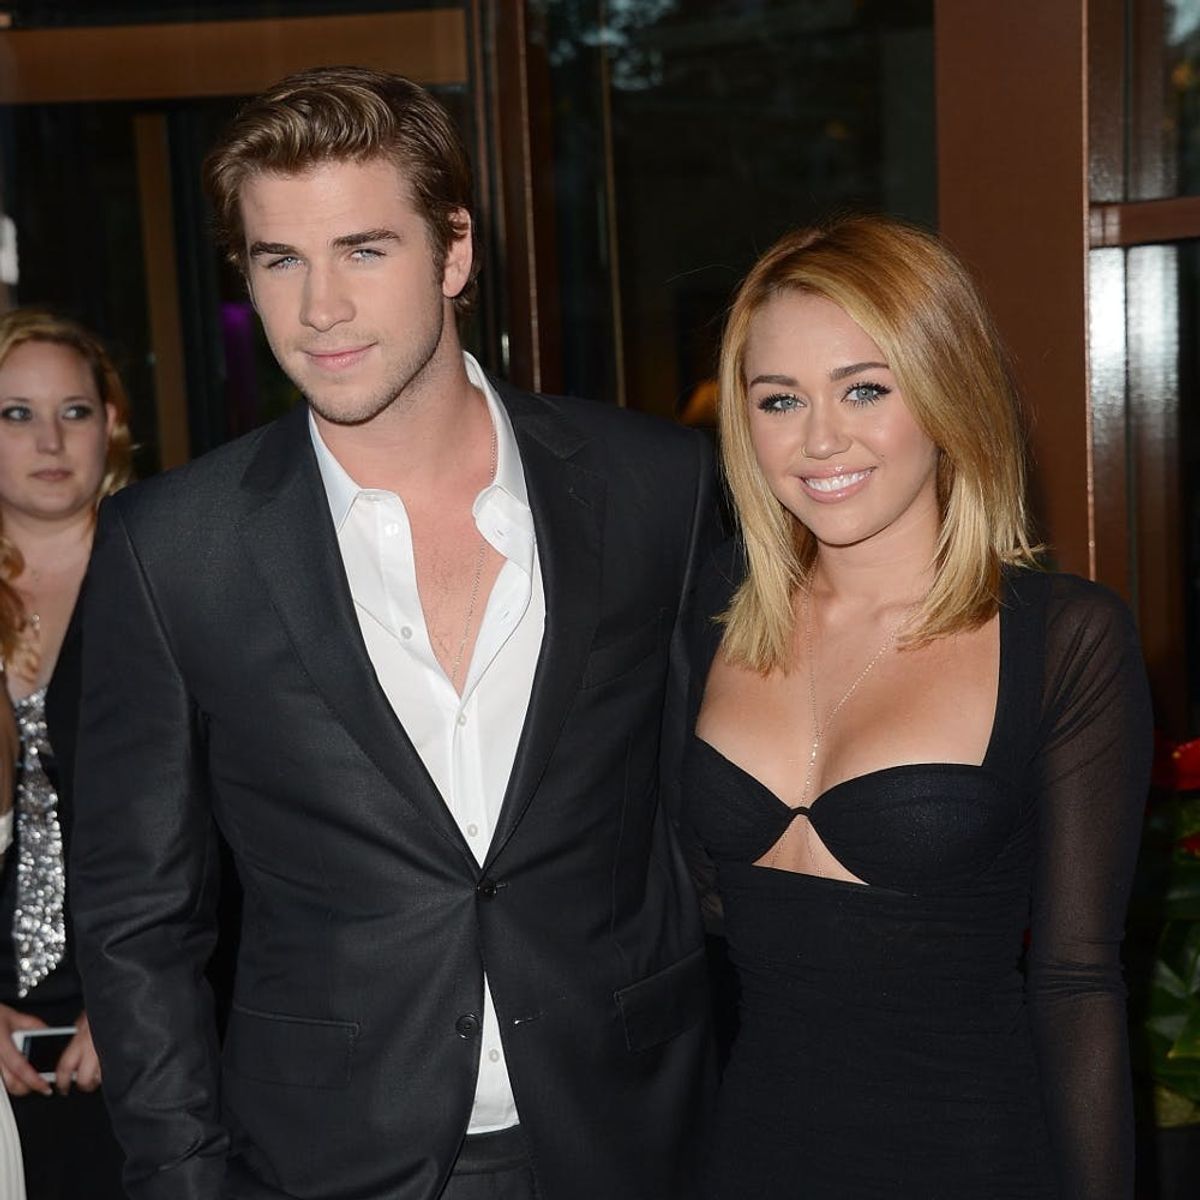 Miley Cyrus and Liam Hemsworth Made a Rare (Adorably Quirky) Public Appearance